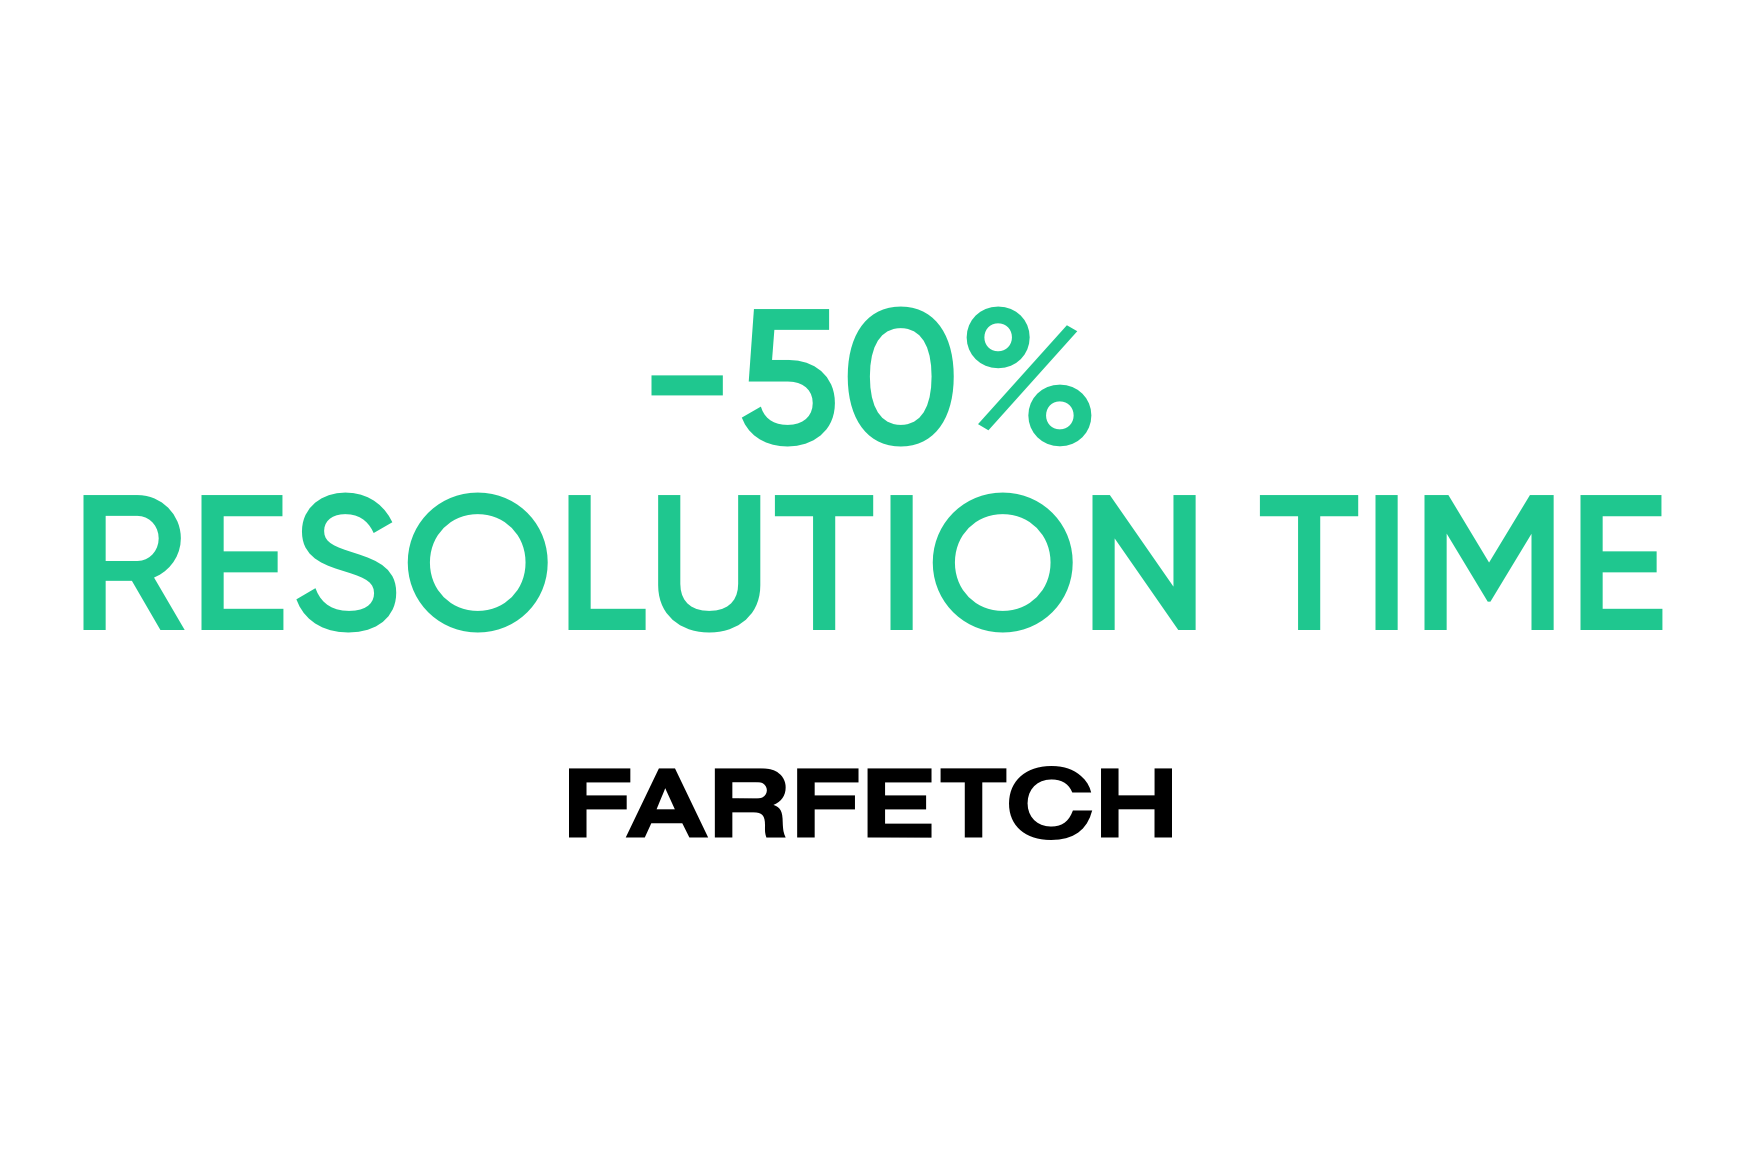 Farfetch: Reduced handling/resolution times by more than 50%